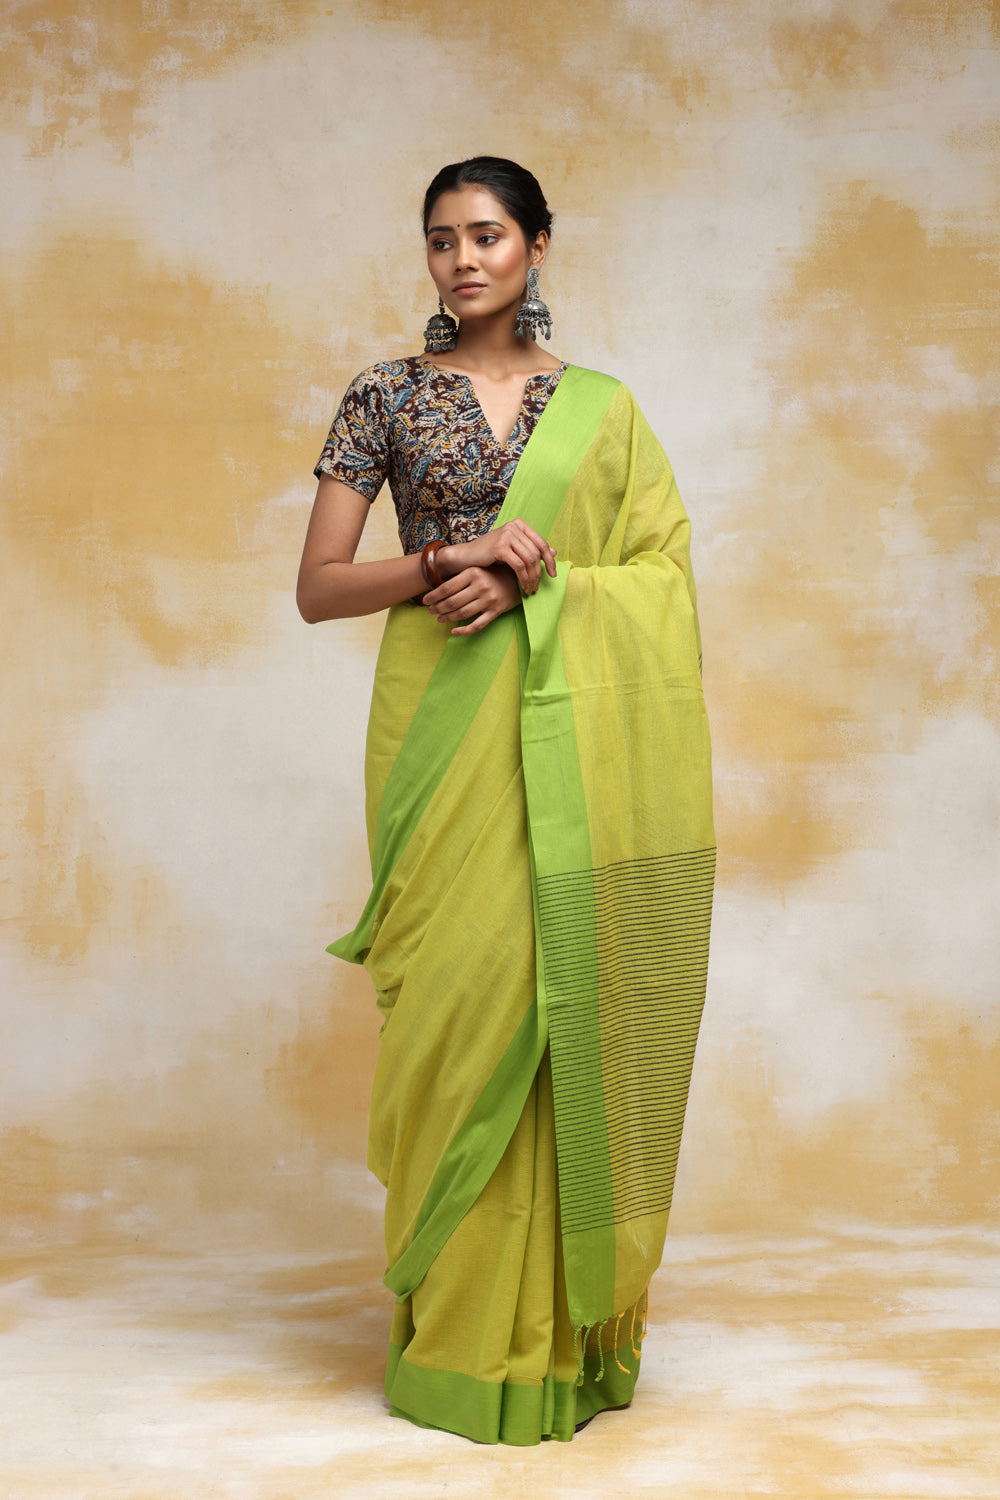 Malaika Arora is a picture of ethnic grace in lime green saree by Anita  Dongre worth Rs.75,000 75000 : Bollywood News - Bollywood Hungama